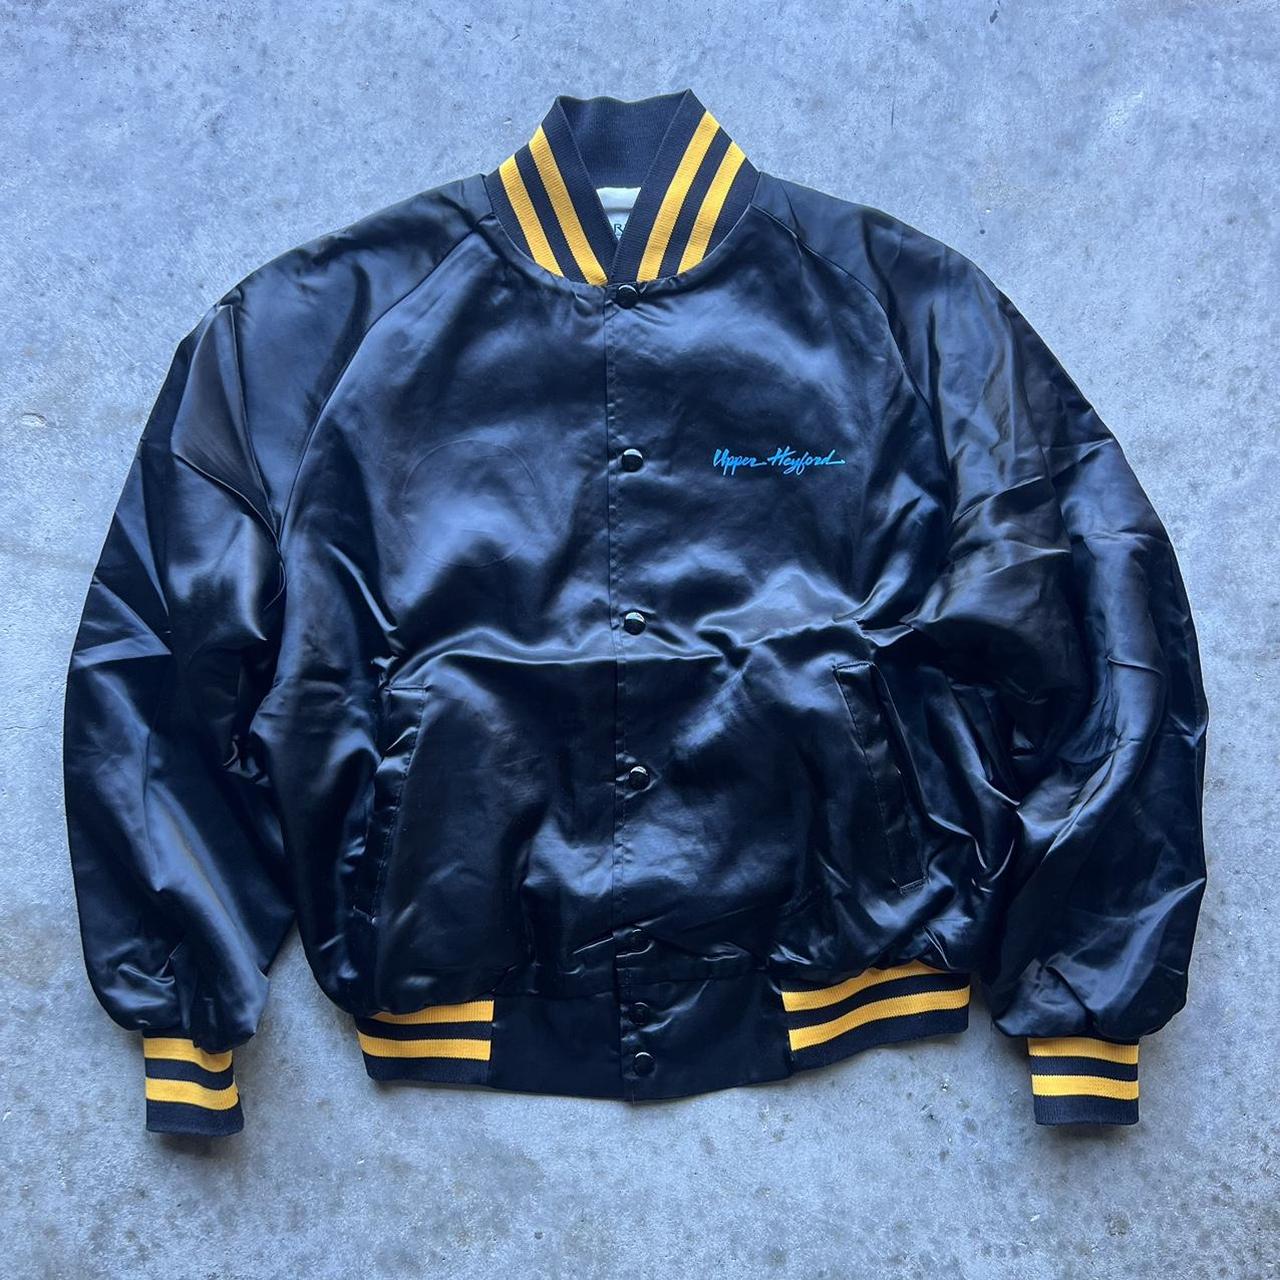 Vintage 80s Black and Yellow Satin Jacket. Worn with... - Depop